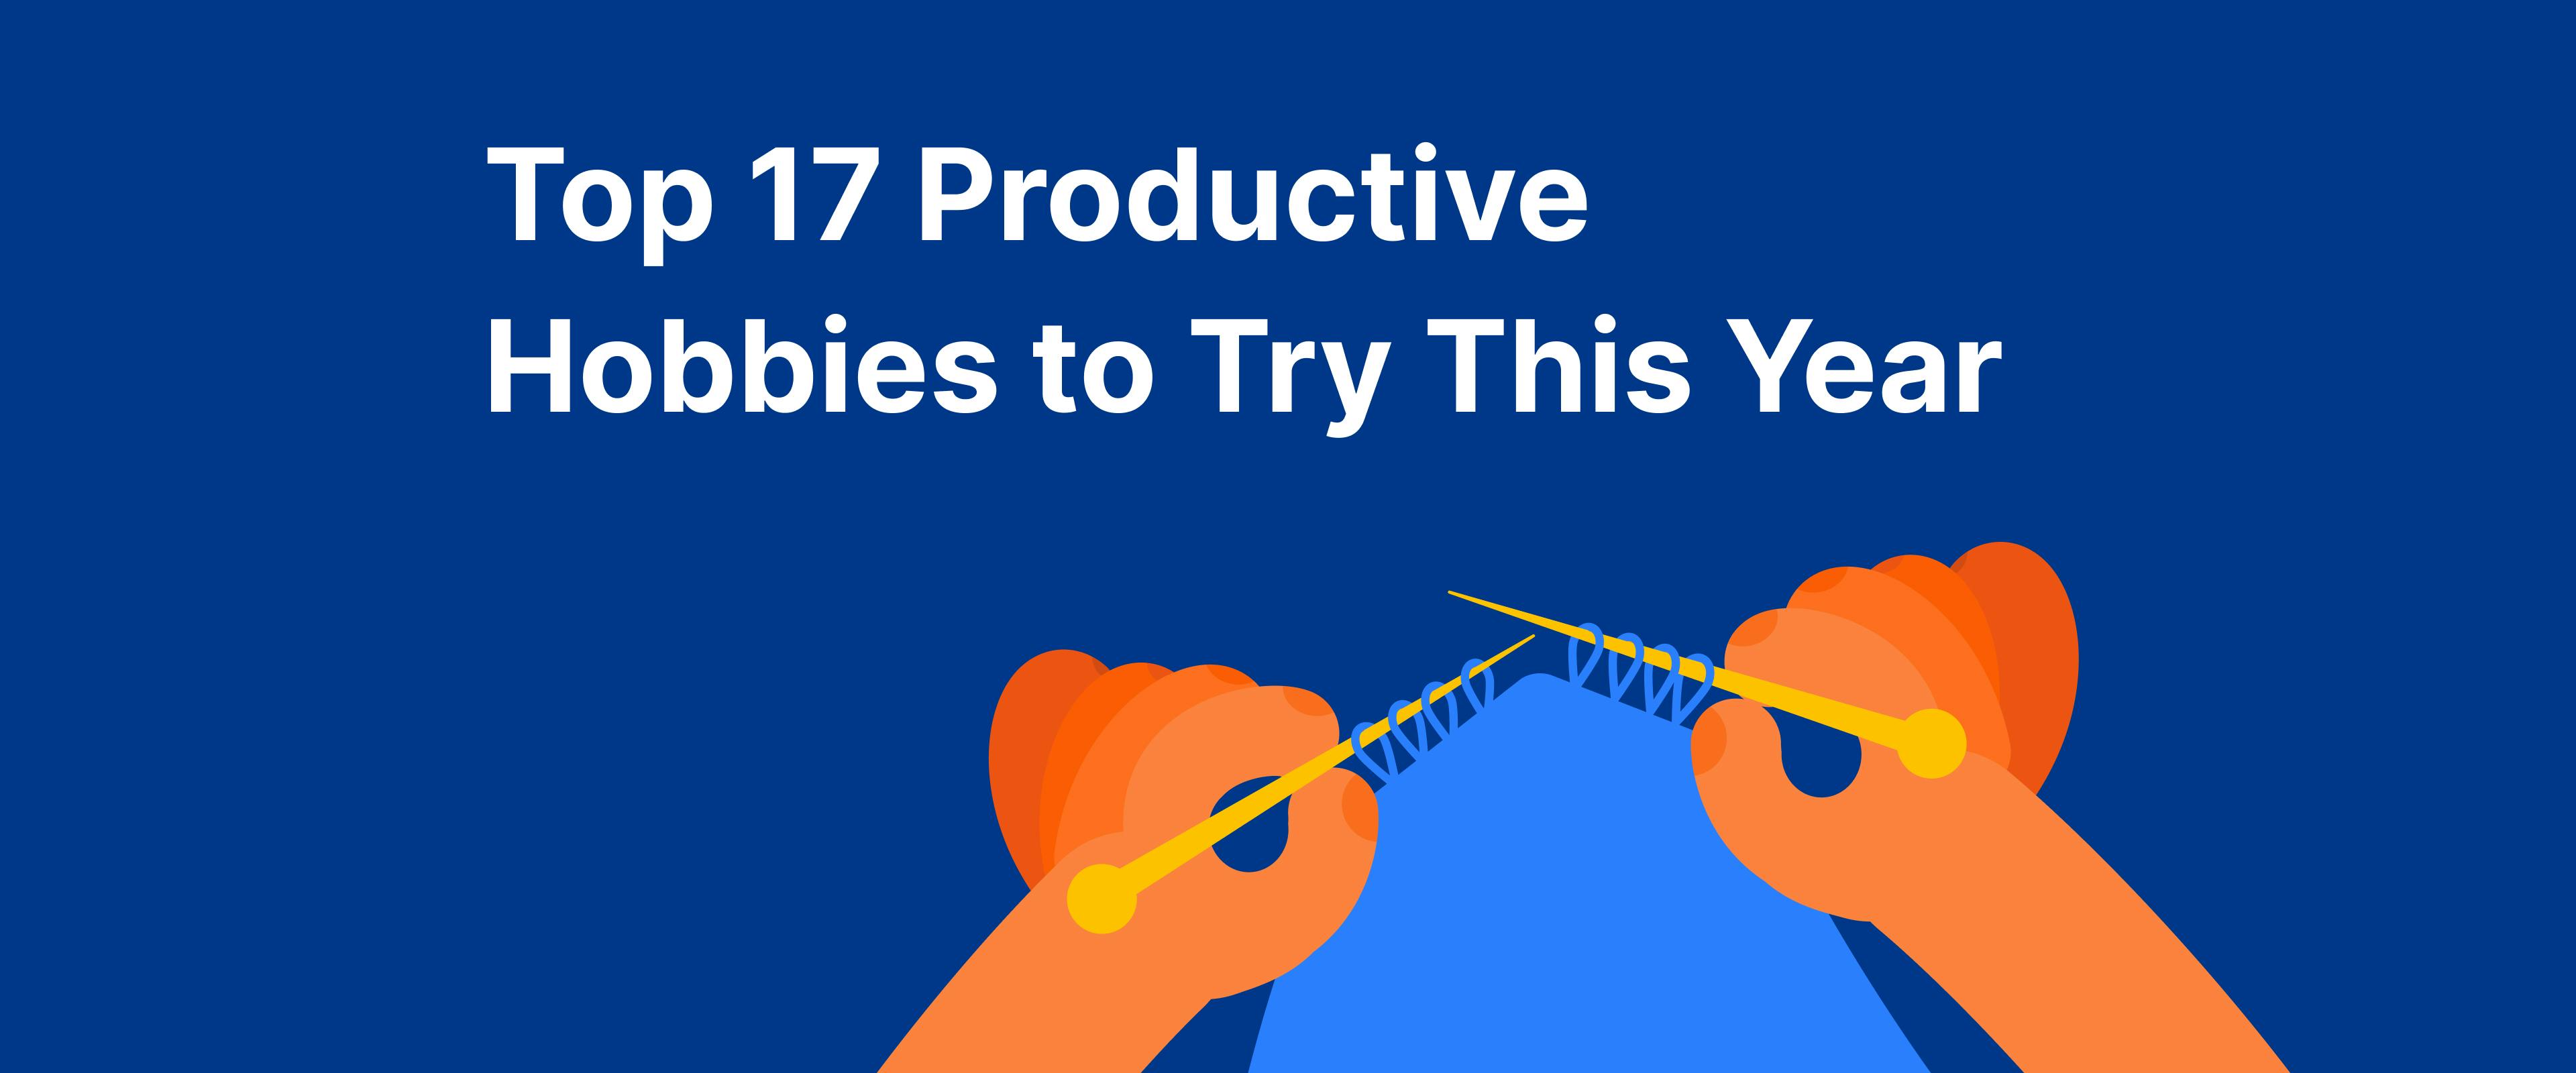 Top 17 Productive Hobbies to Try This Year - Headway App